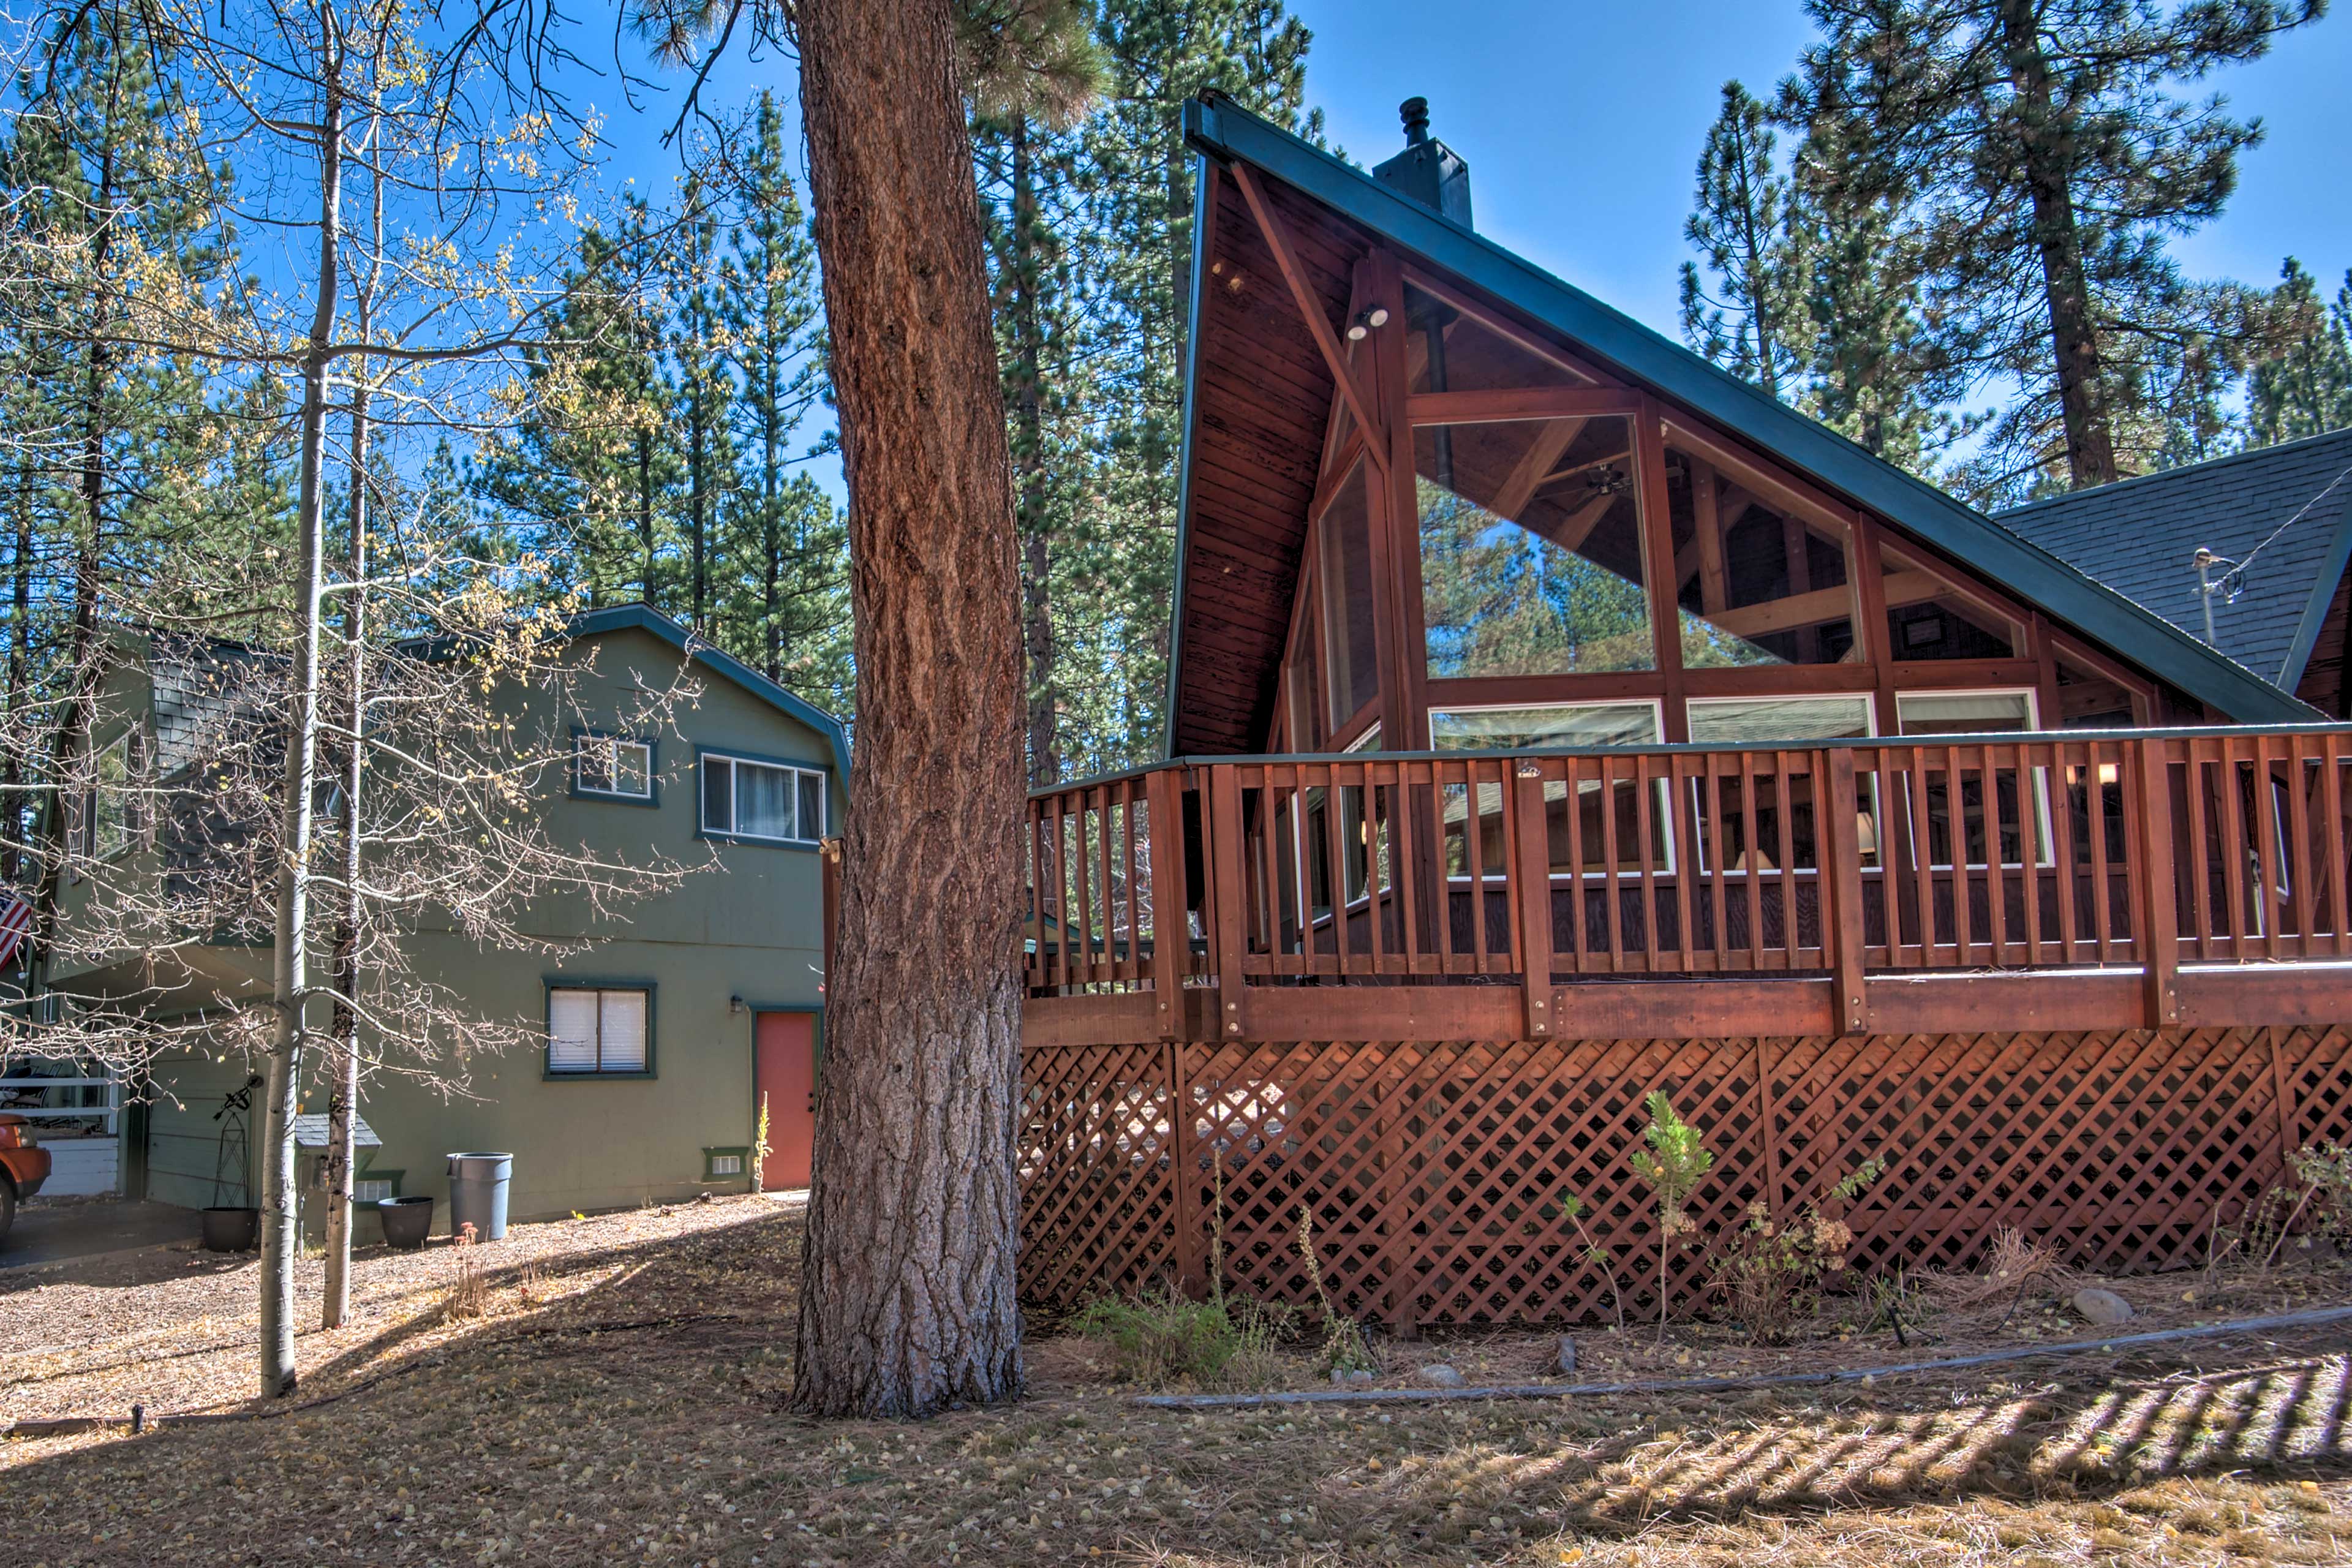 South Lake Tahoe Vacation Rental | 3BR | 2BA | 1,356 Sq Ft | Stairs to Access